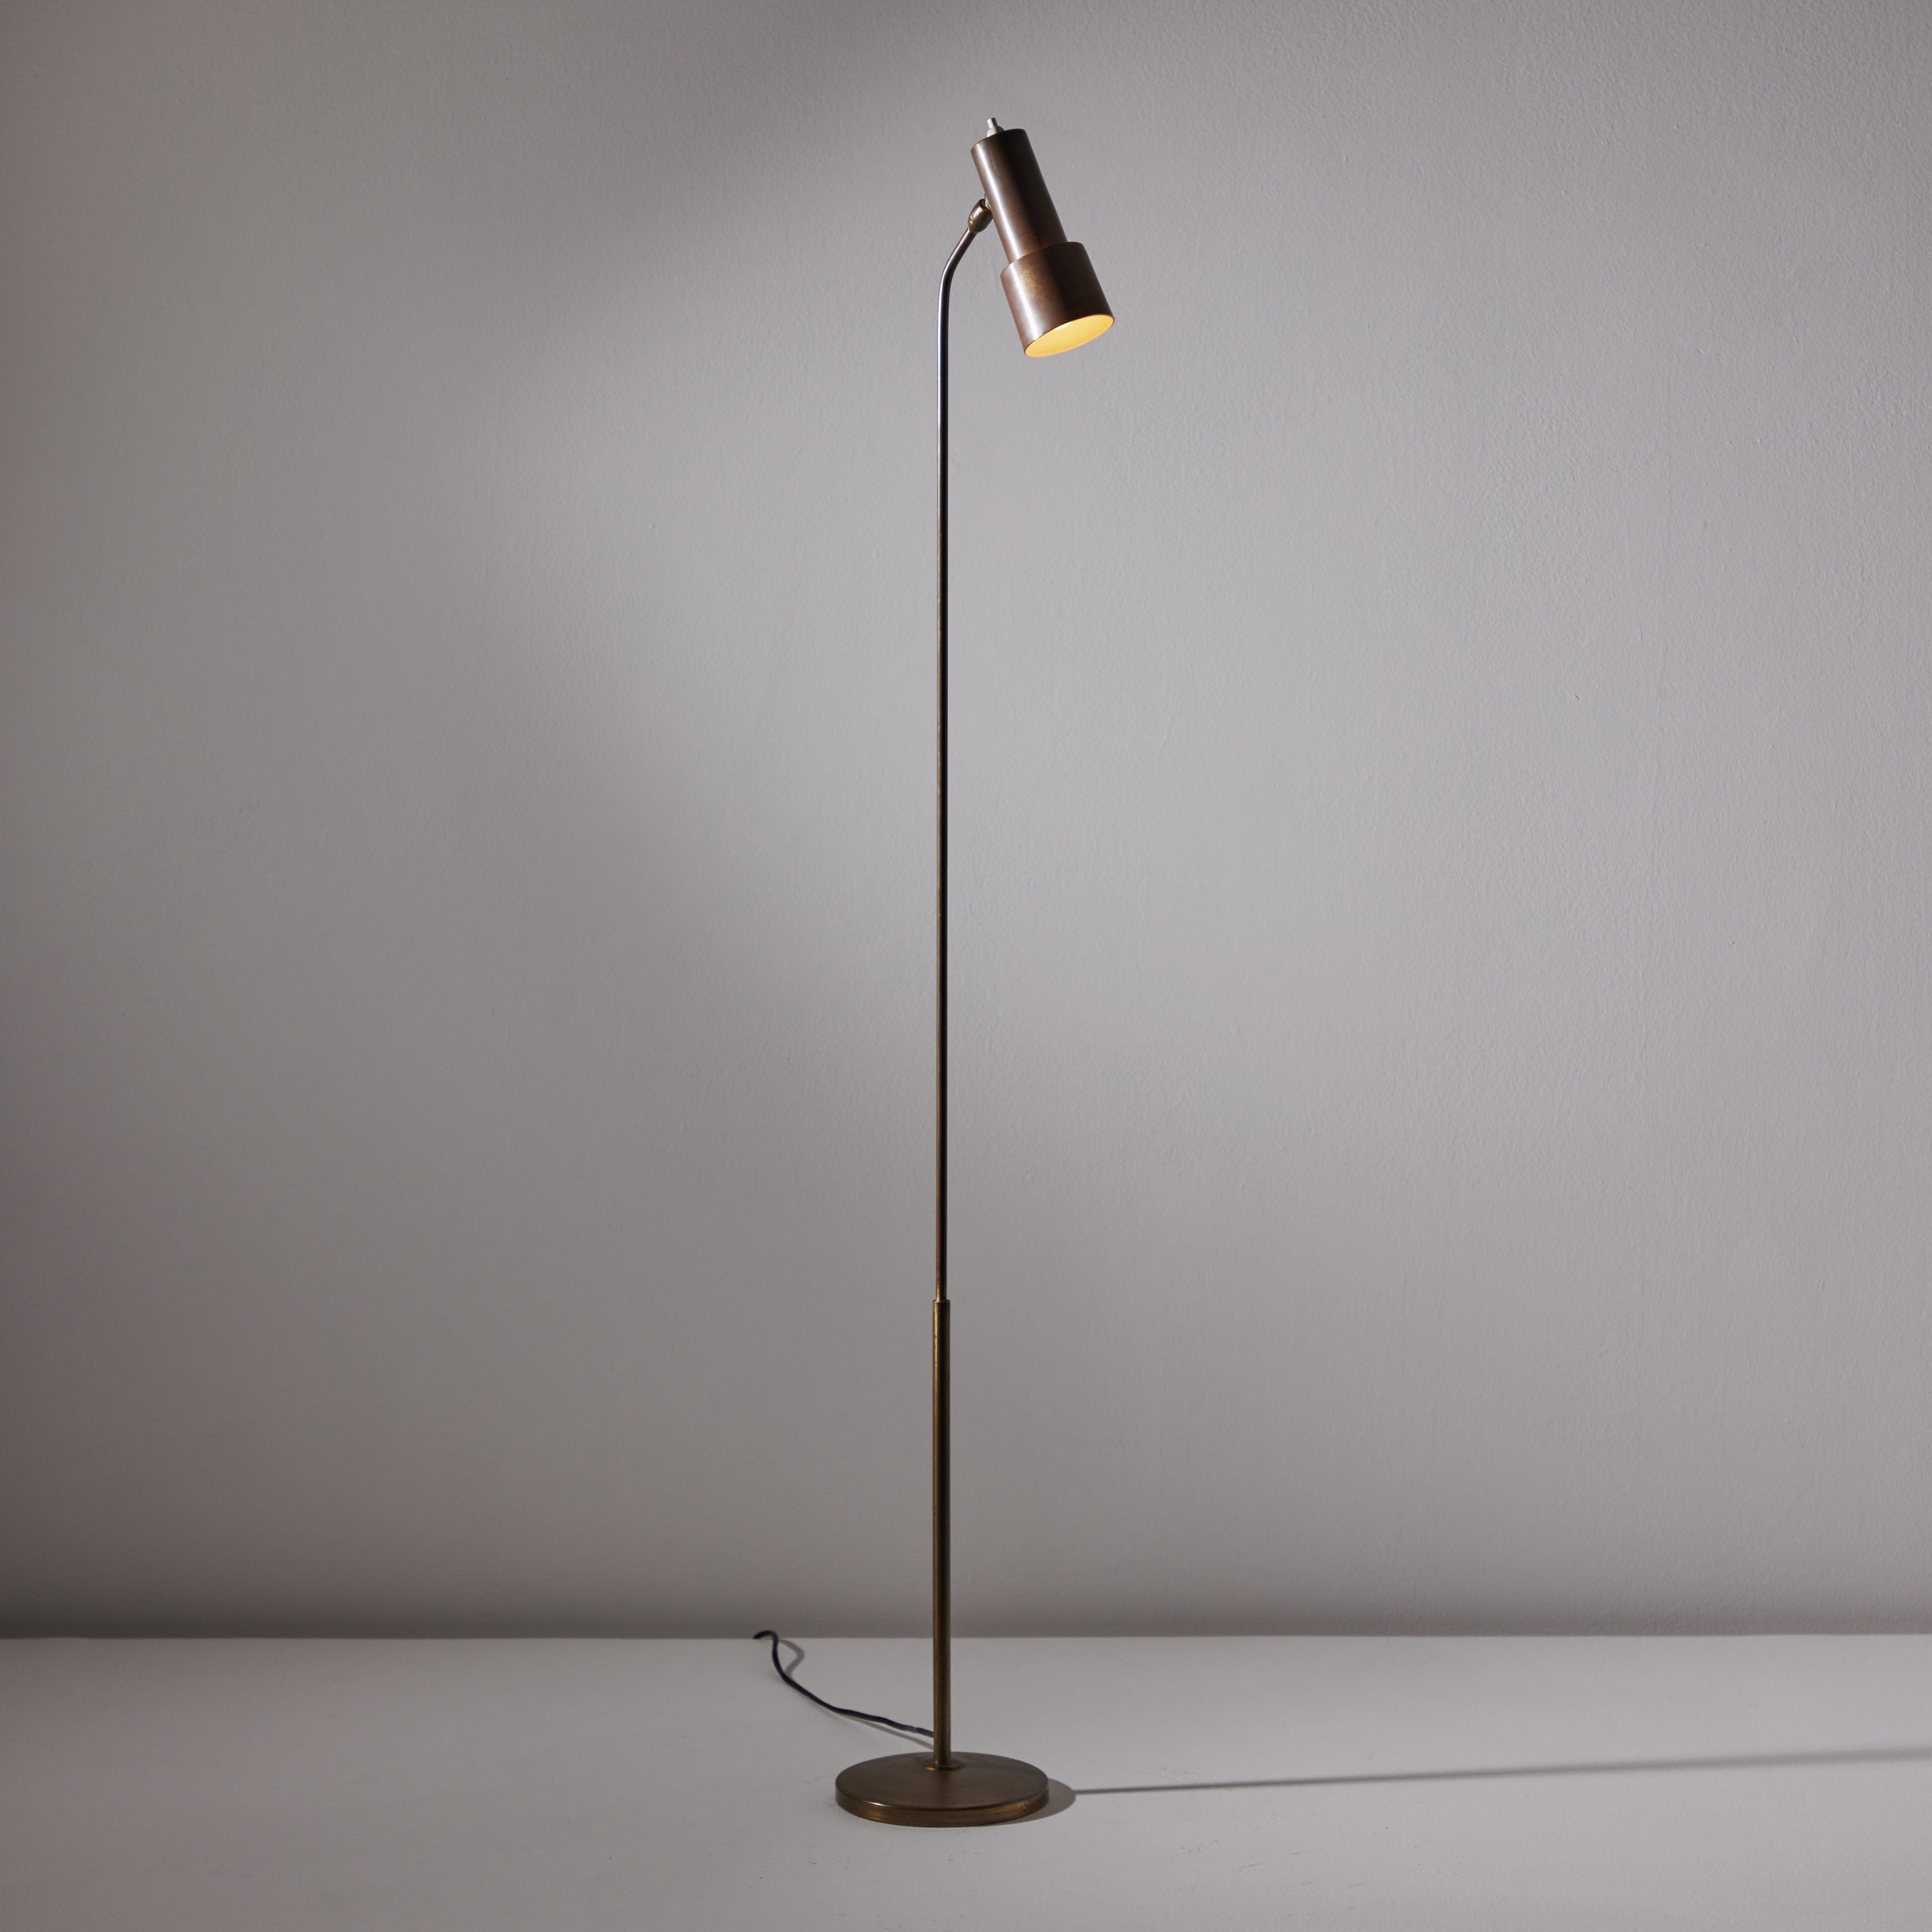 Model 1968 Floor Lamp by Fontana Arte. Manufactured in Italy, circa the 1950s. Enameled metal and brass. Original cord. Shade pivots to various positions. Takes one E27 60W maximum bulb. Bulb provided as a one-time courtesy. Literature: Bibliography